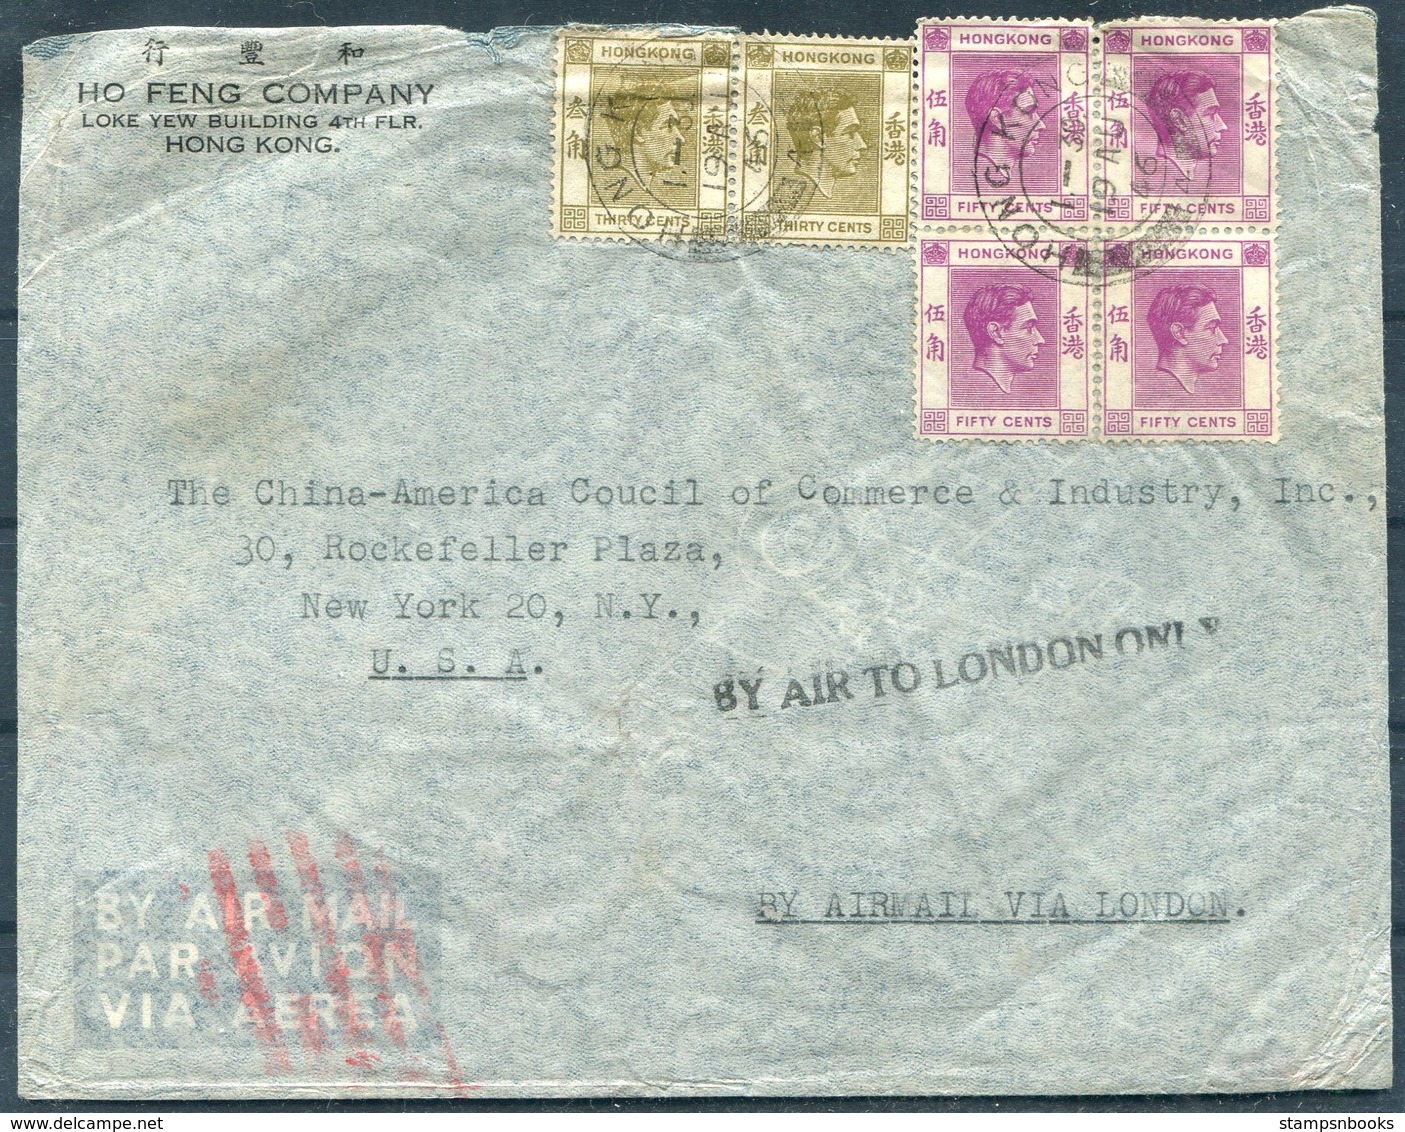 1946 Hong Kong $2.60 Rate Airmail Cover - The China America Council Of Commerce, New York USA. "BY AIR TO LONDON ONLY" - Covers & Documents